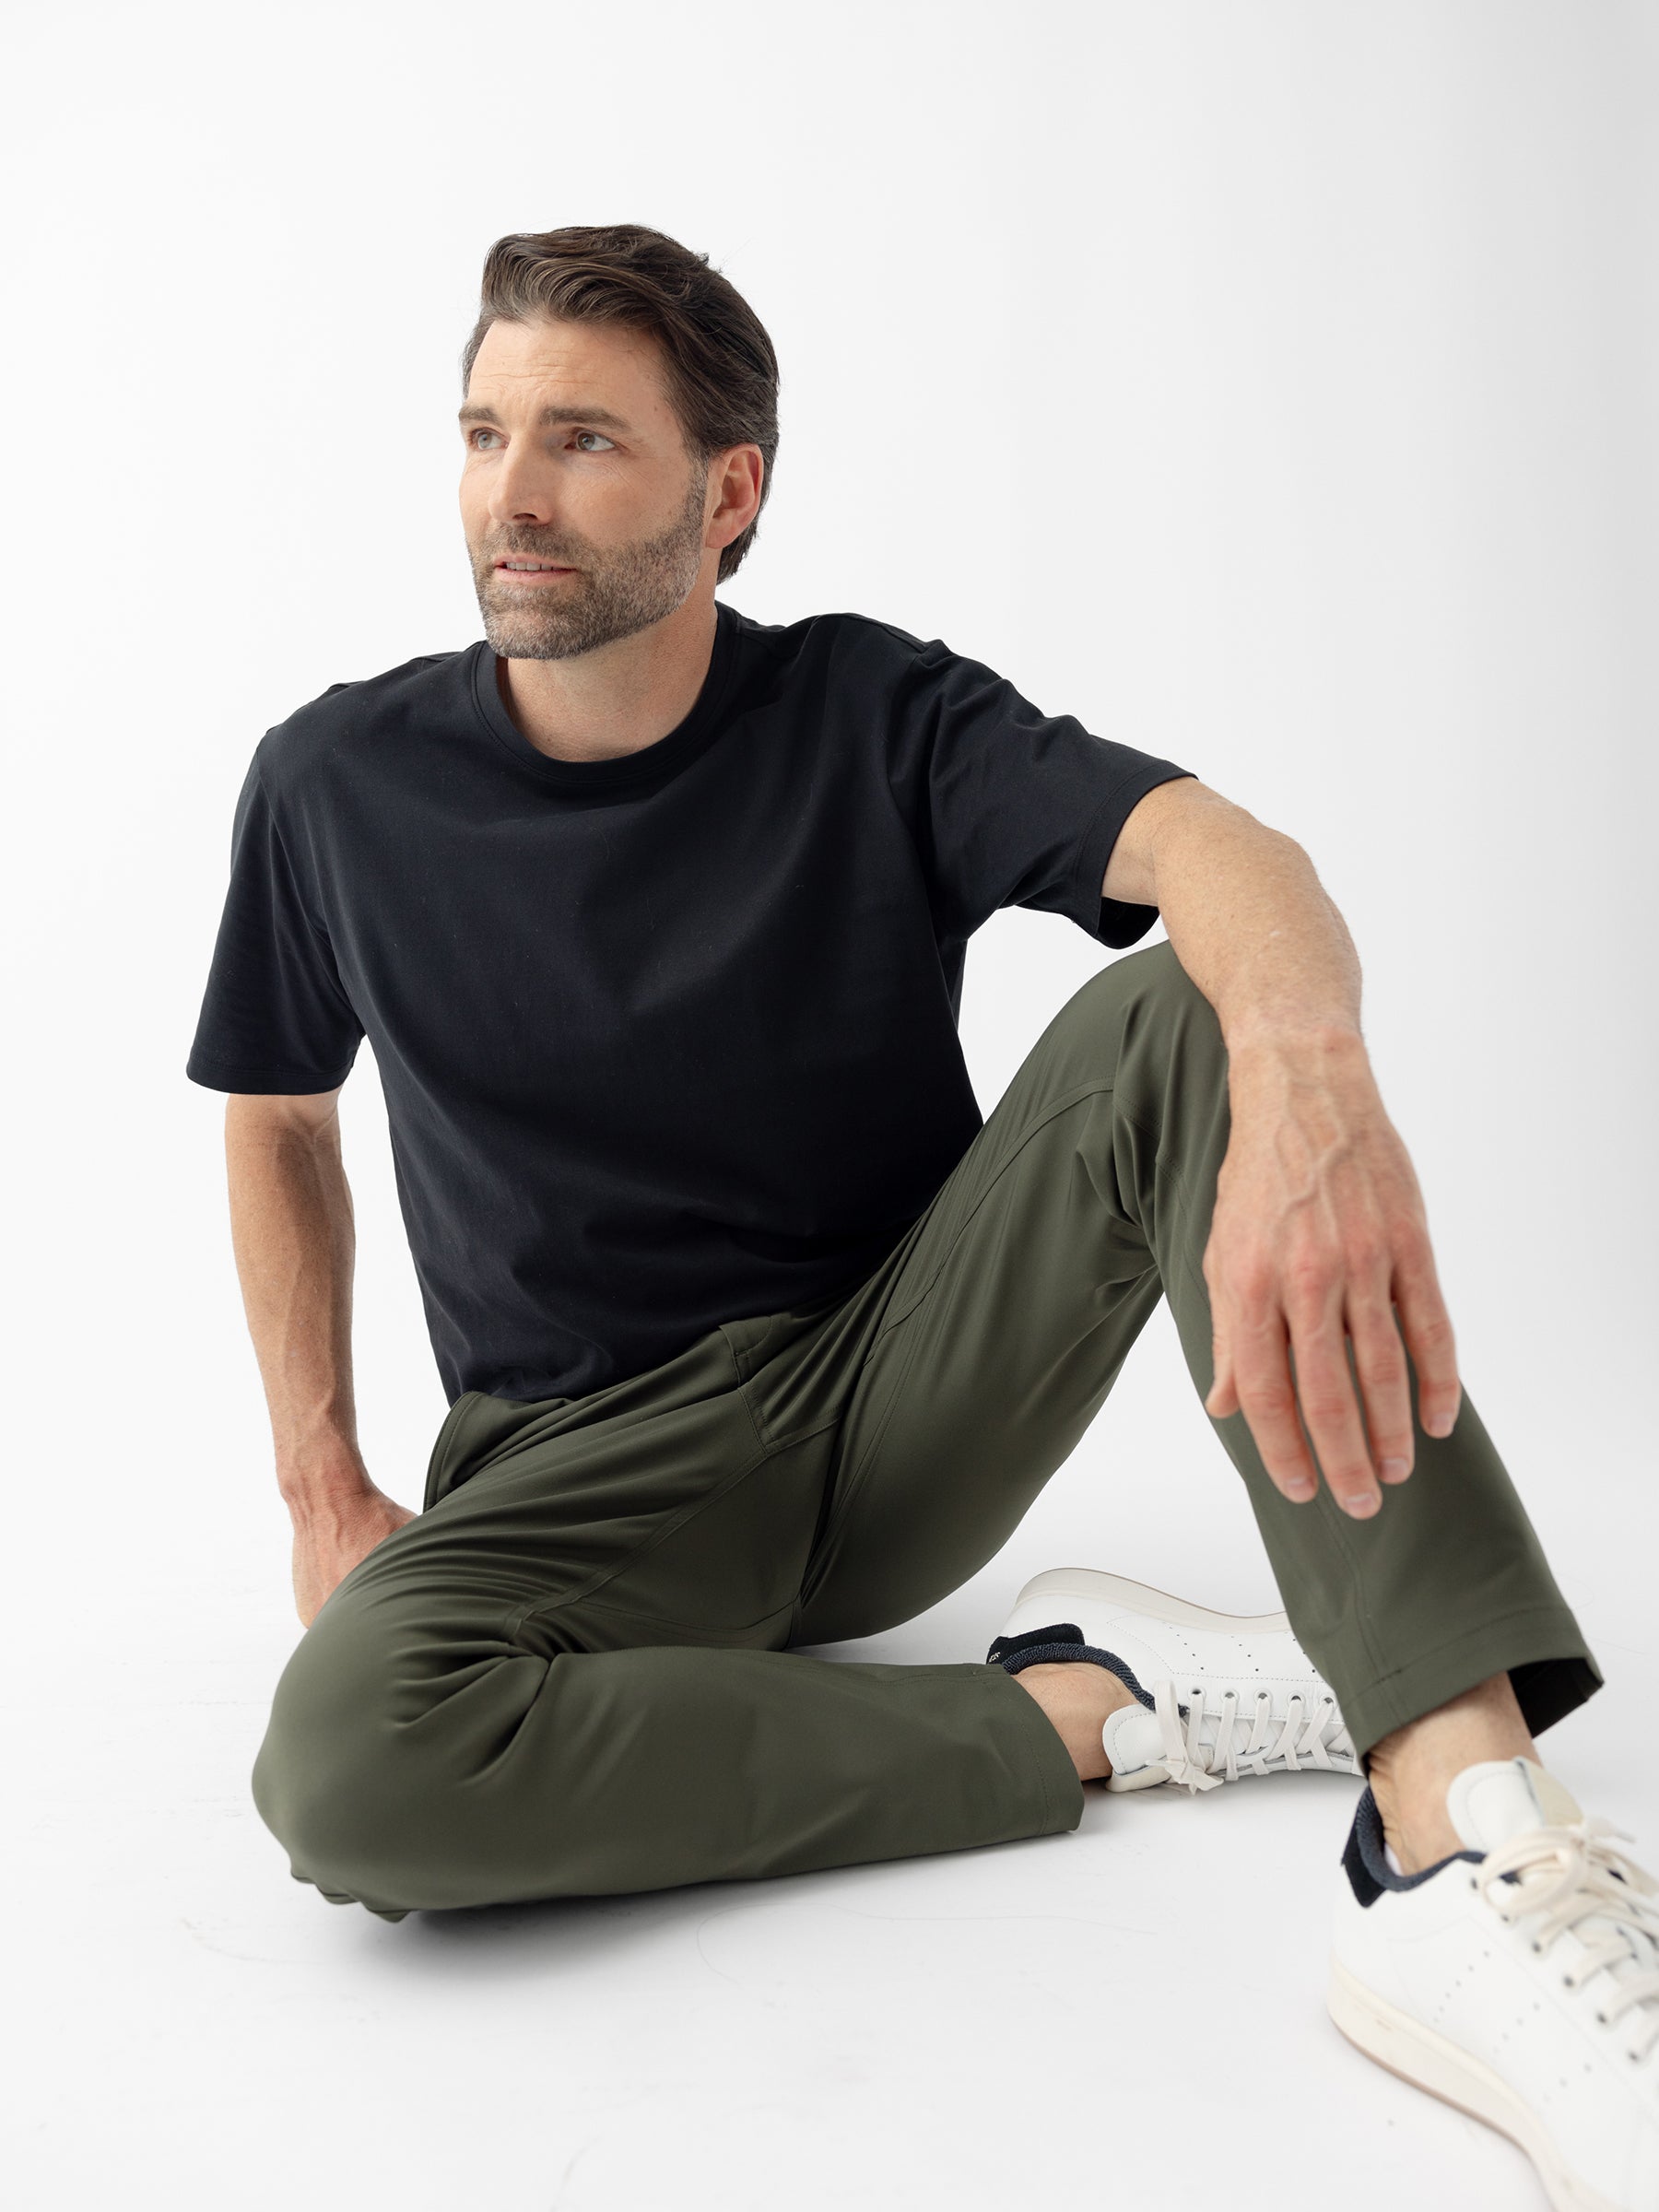 A man with short dark hair and a beard is seated on the ground against a plain white background. He is wearing a black T-shirt, Cozy Earth's olive green Men's Everywhere Pant 32L, and white sneakers with black detailing. He gazes off to the side, with one knee bent and the other leg folded under him. |Color:Olive